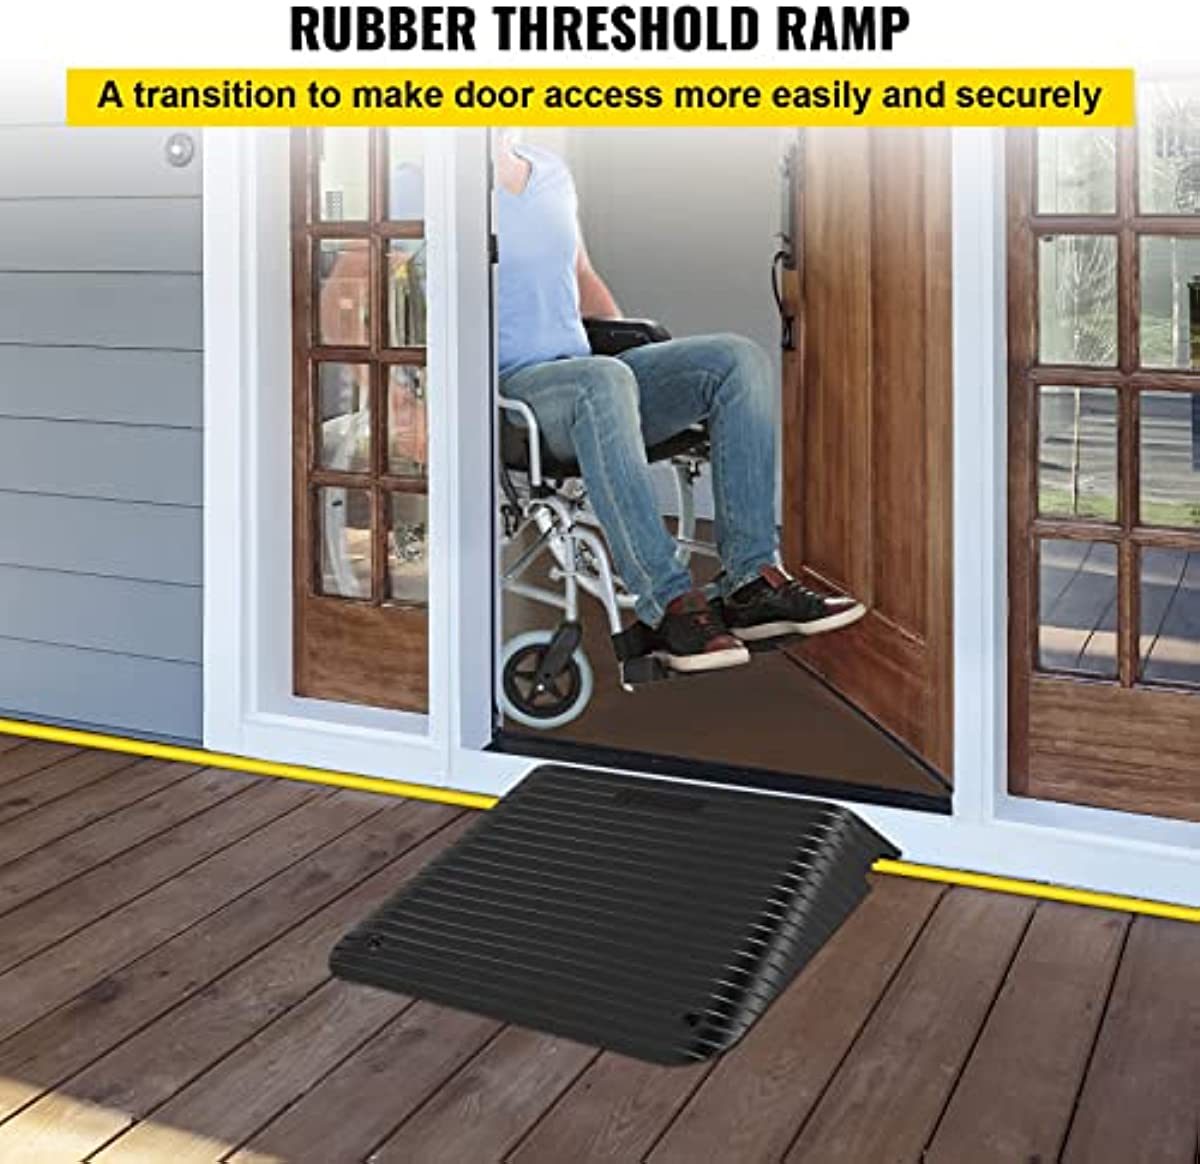 VEVOR Rubber Threshold Ramp, 4\" Rise Doorway Ramp, 1 Pack with Channel Recycled Rubber Rated 3300 Lbs Load Capacity, Non-Slip Surface with Full Accessories for Wheelchair and Scooter